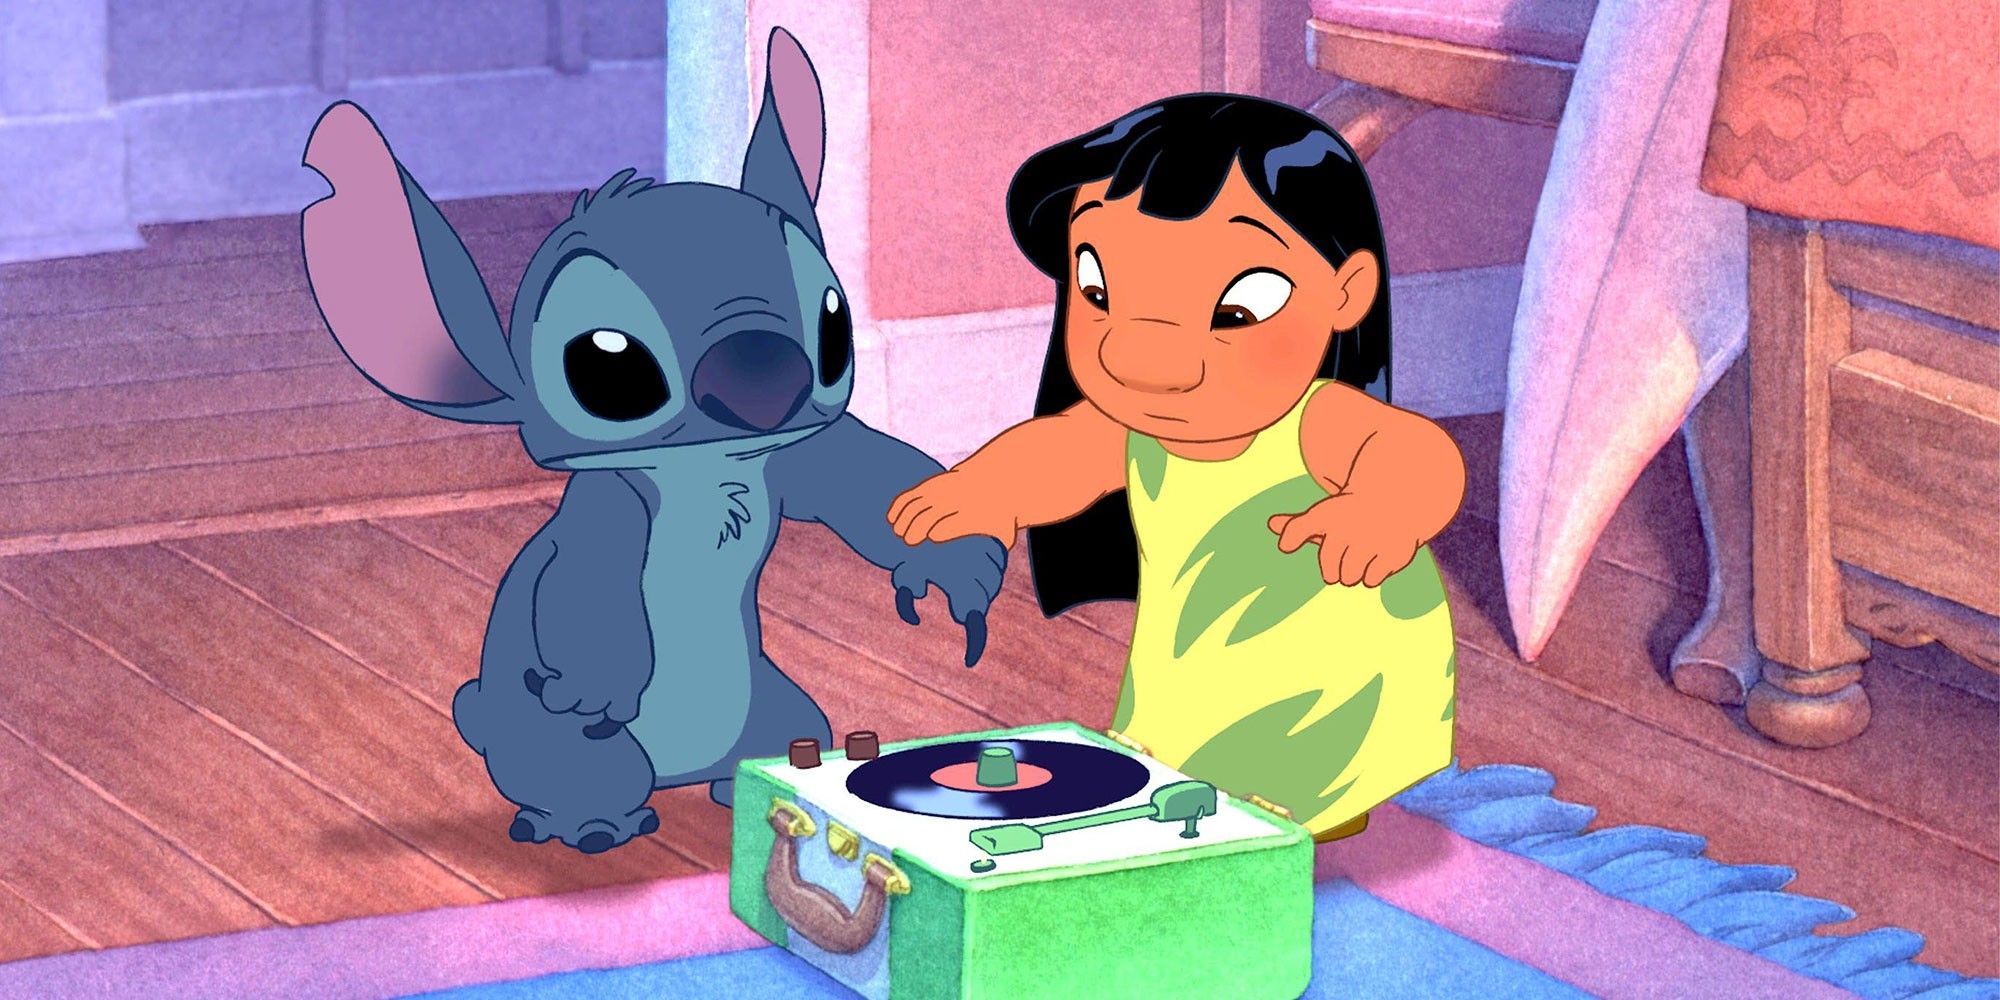 Lilo stops Stitch from touching a record player